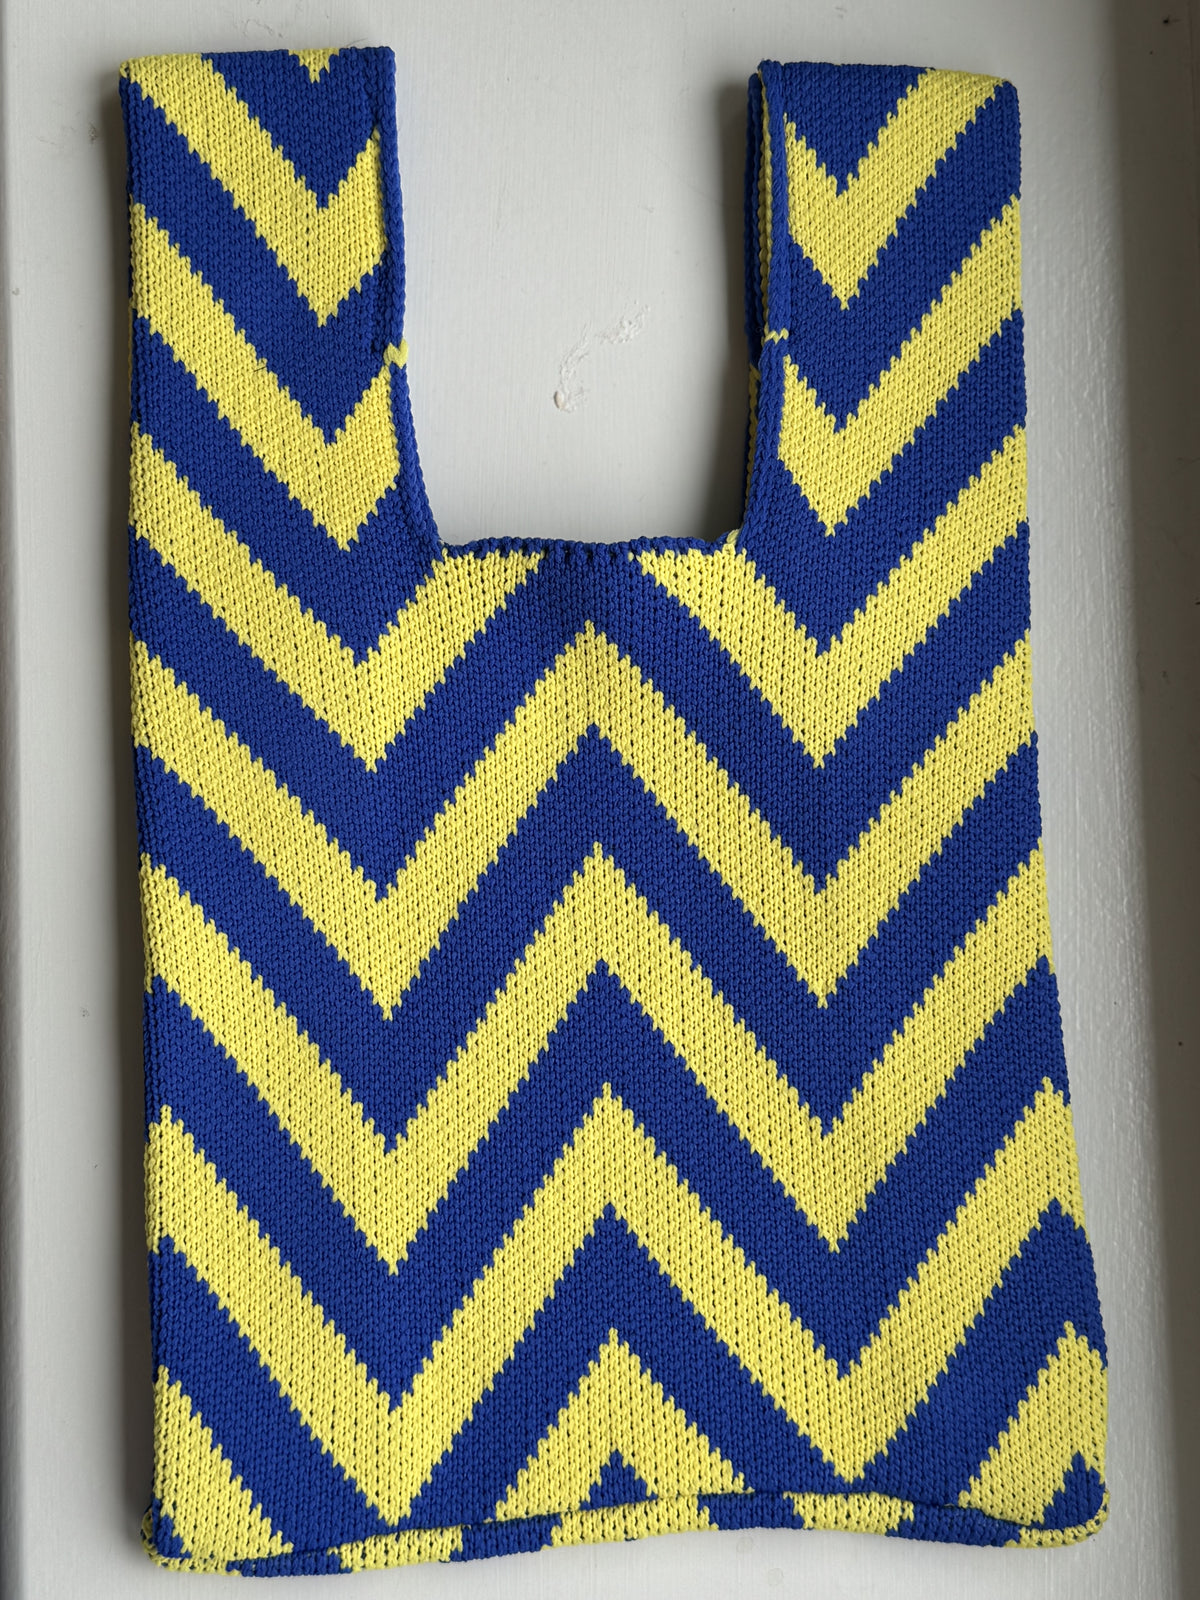 Chevron bag in blue and yellow